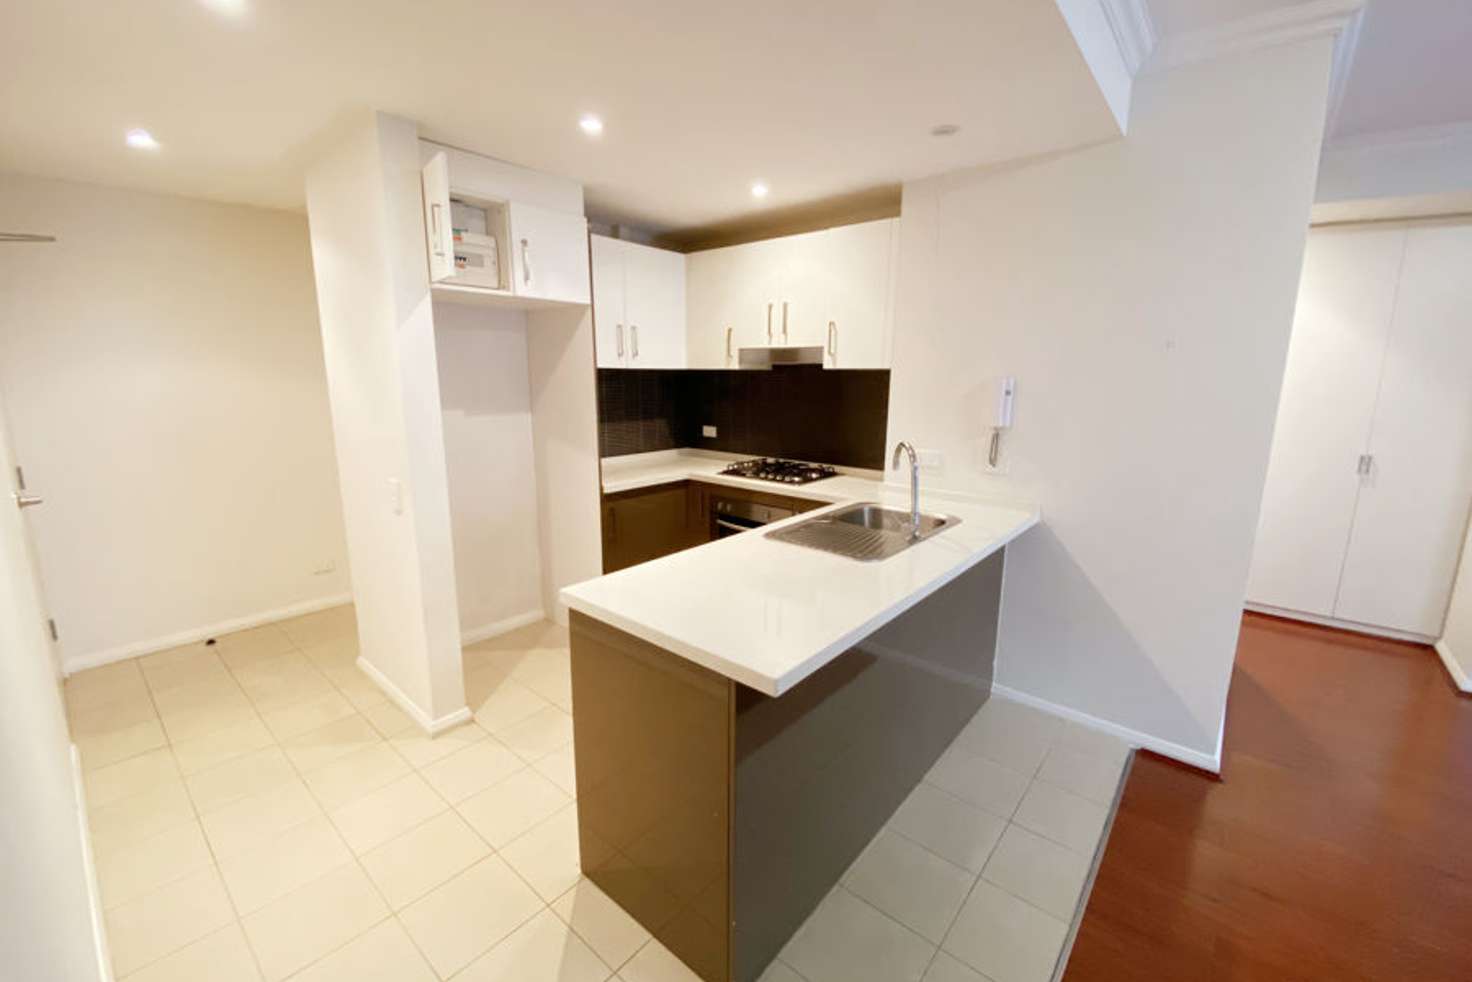 Main view of Homely apartment listing, 203B/16-24 Parramatta Rd, Strathfield NSW 2135